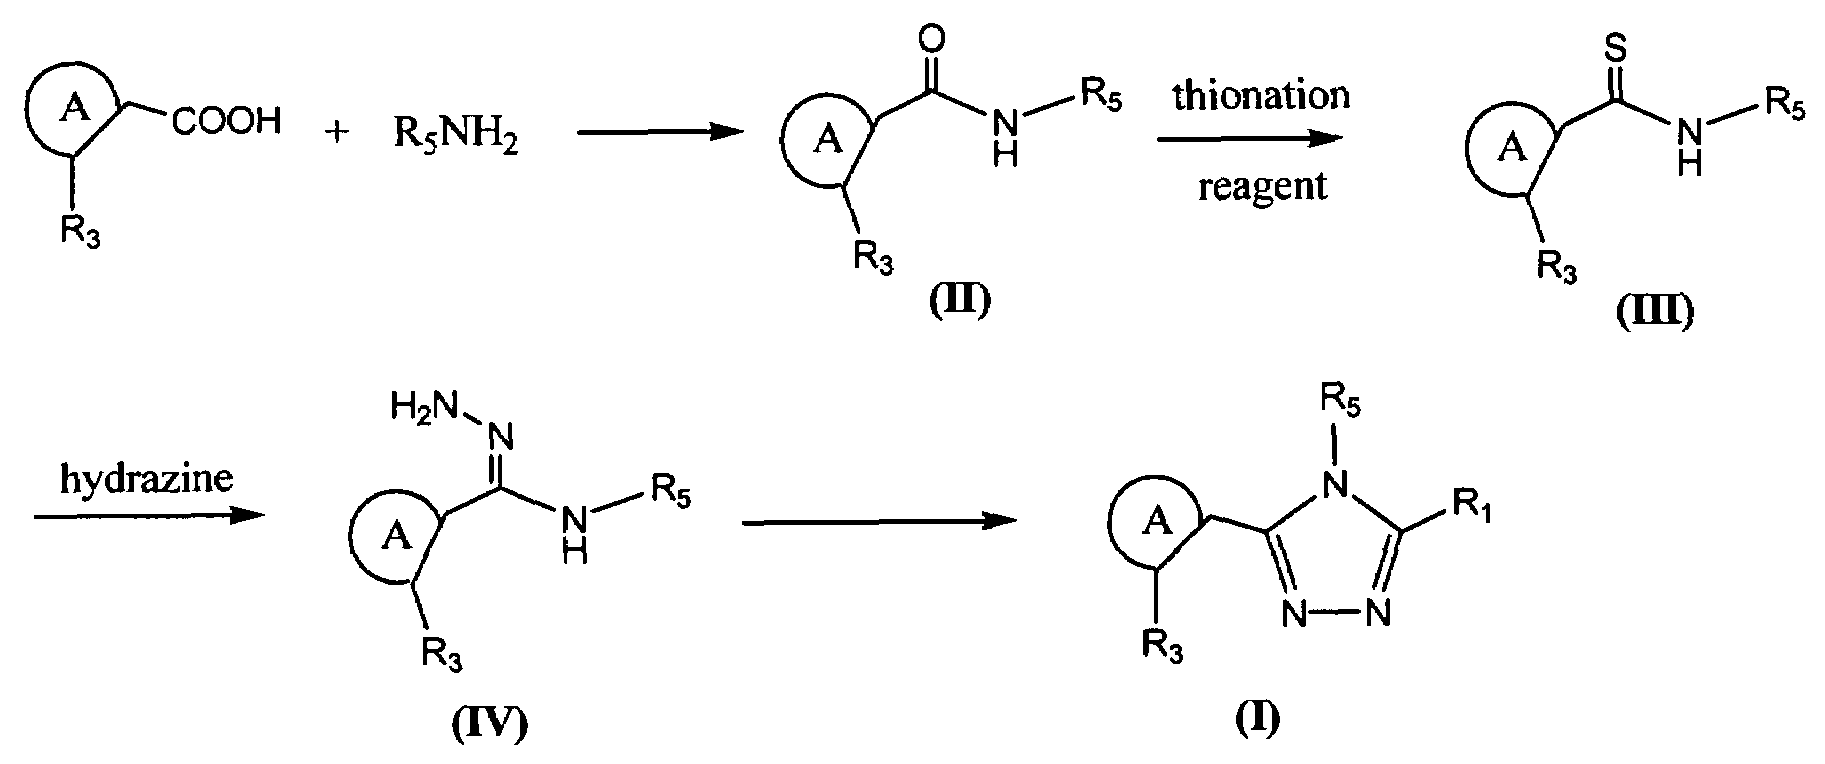 Synthesis of triazole compounds that modulate HSP90 activity